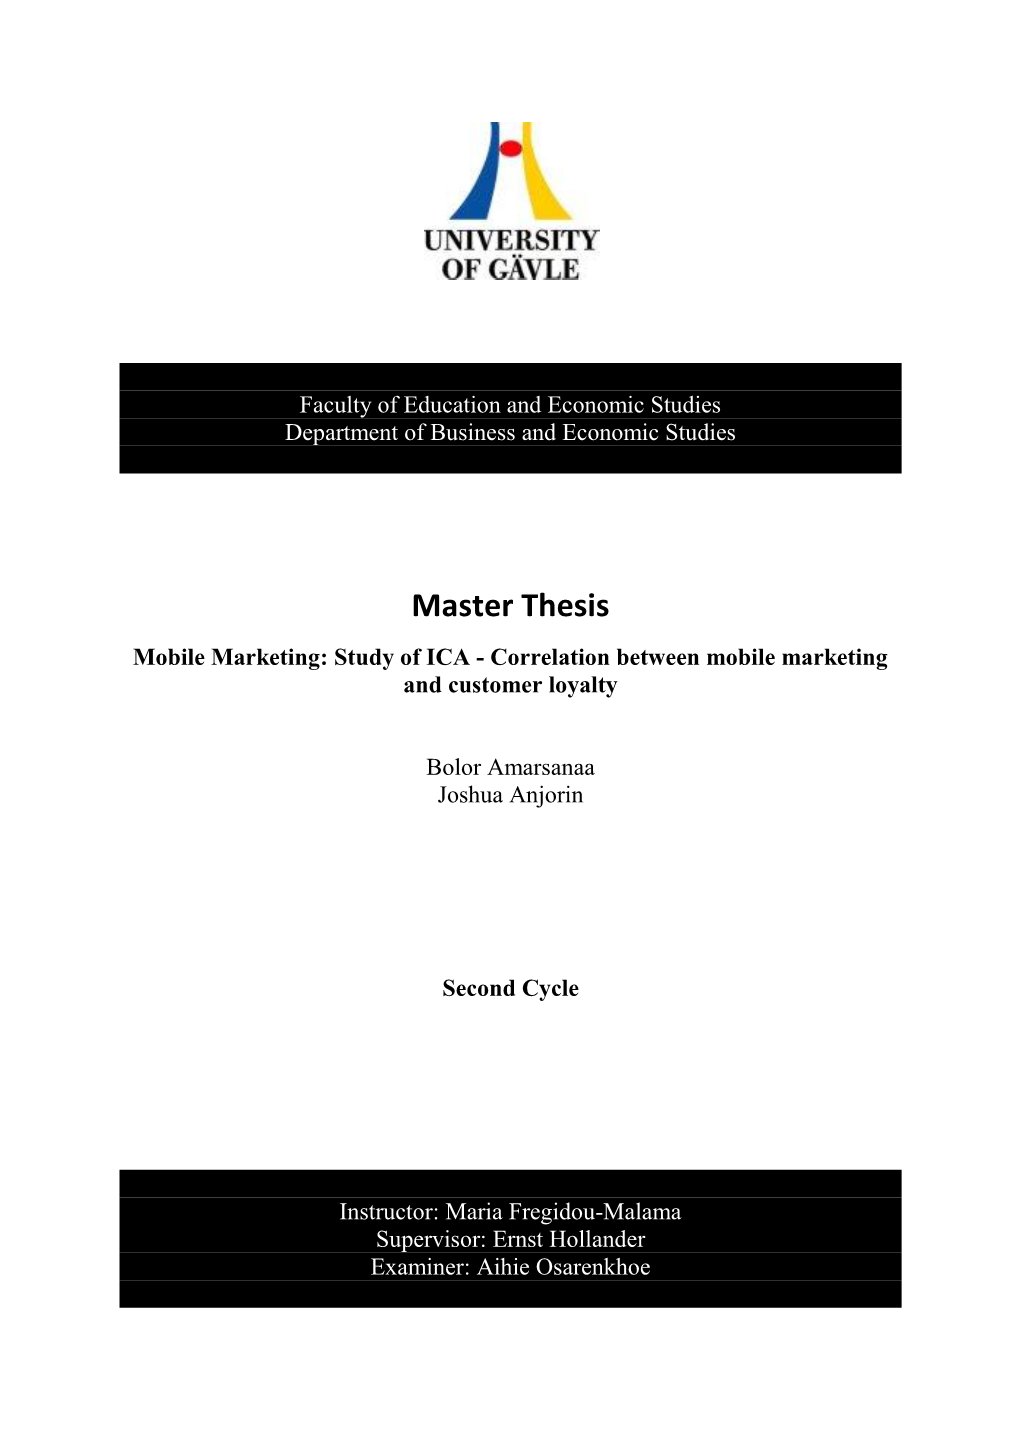 Master Thesis Mobile Marketing: Study of ICA - Correlation Between Mobile Marketing and Customer Loyalty